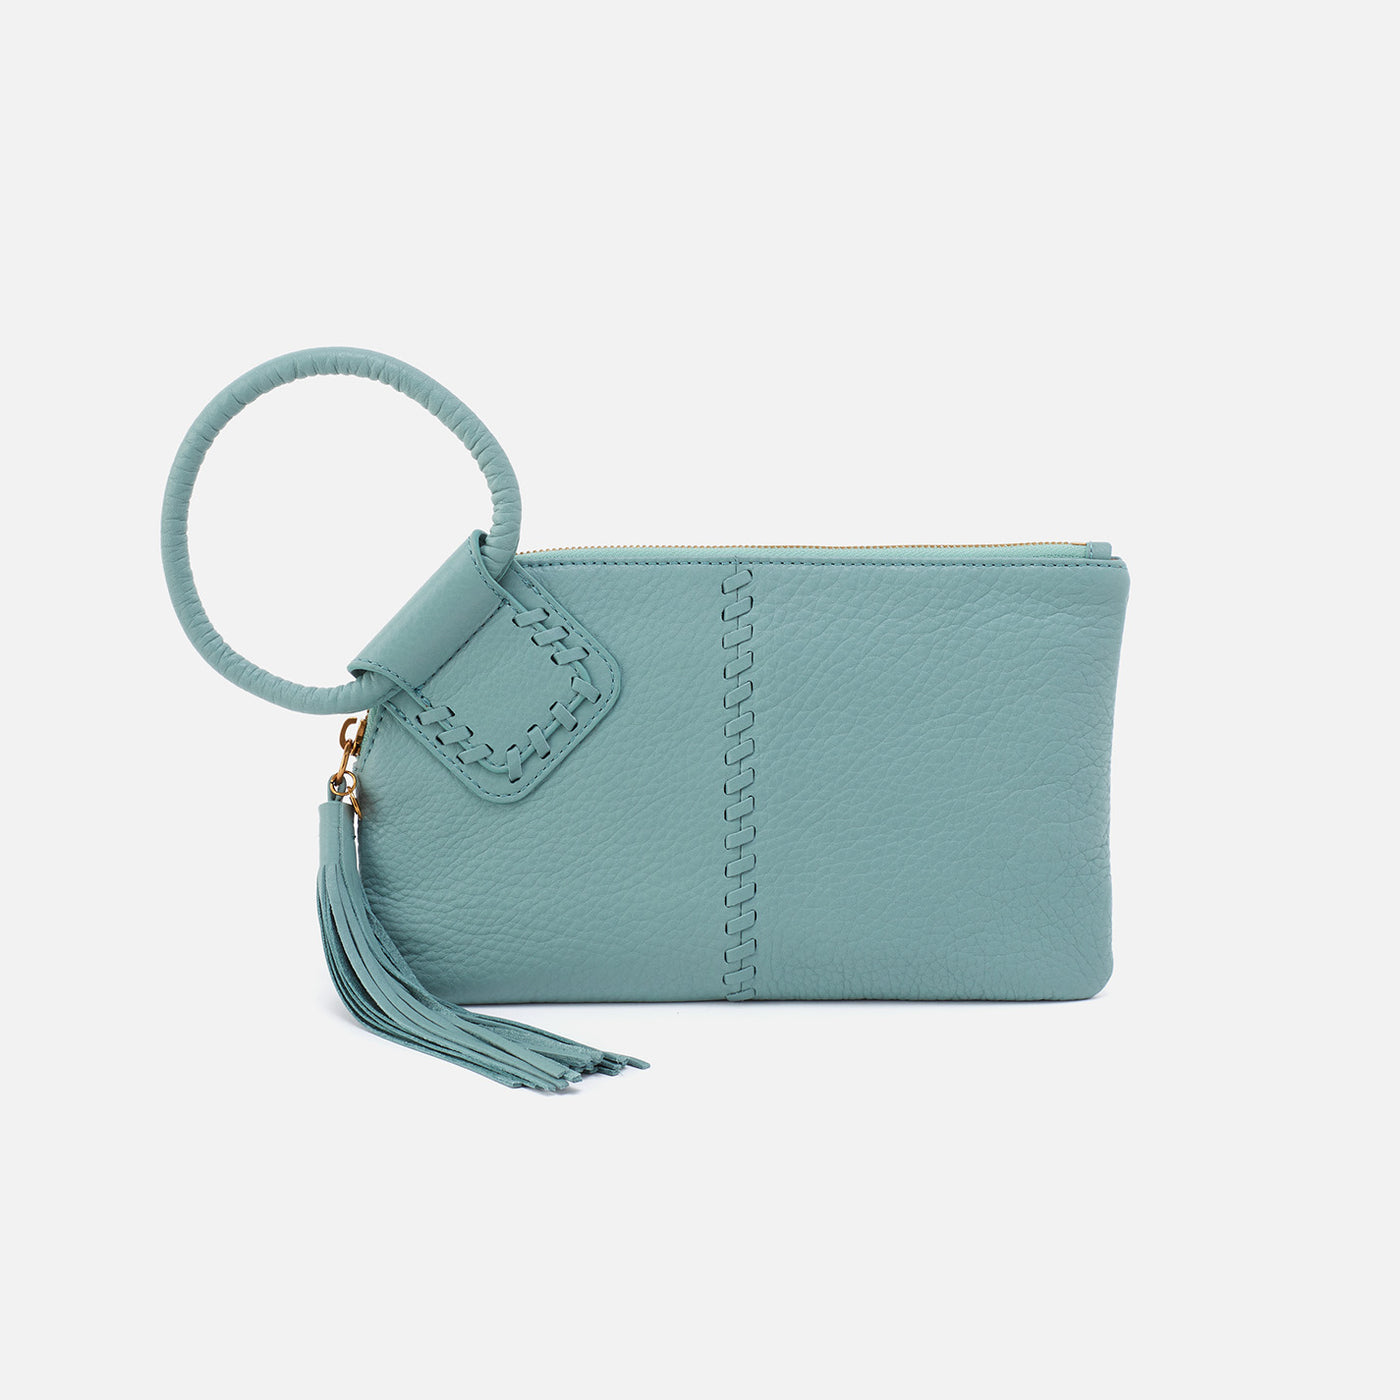 Sable Wristlet in Pebbled Leather - Pale Green